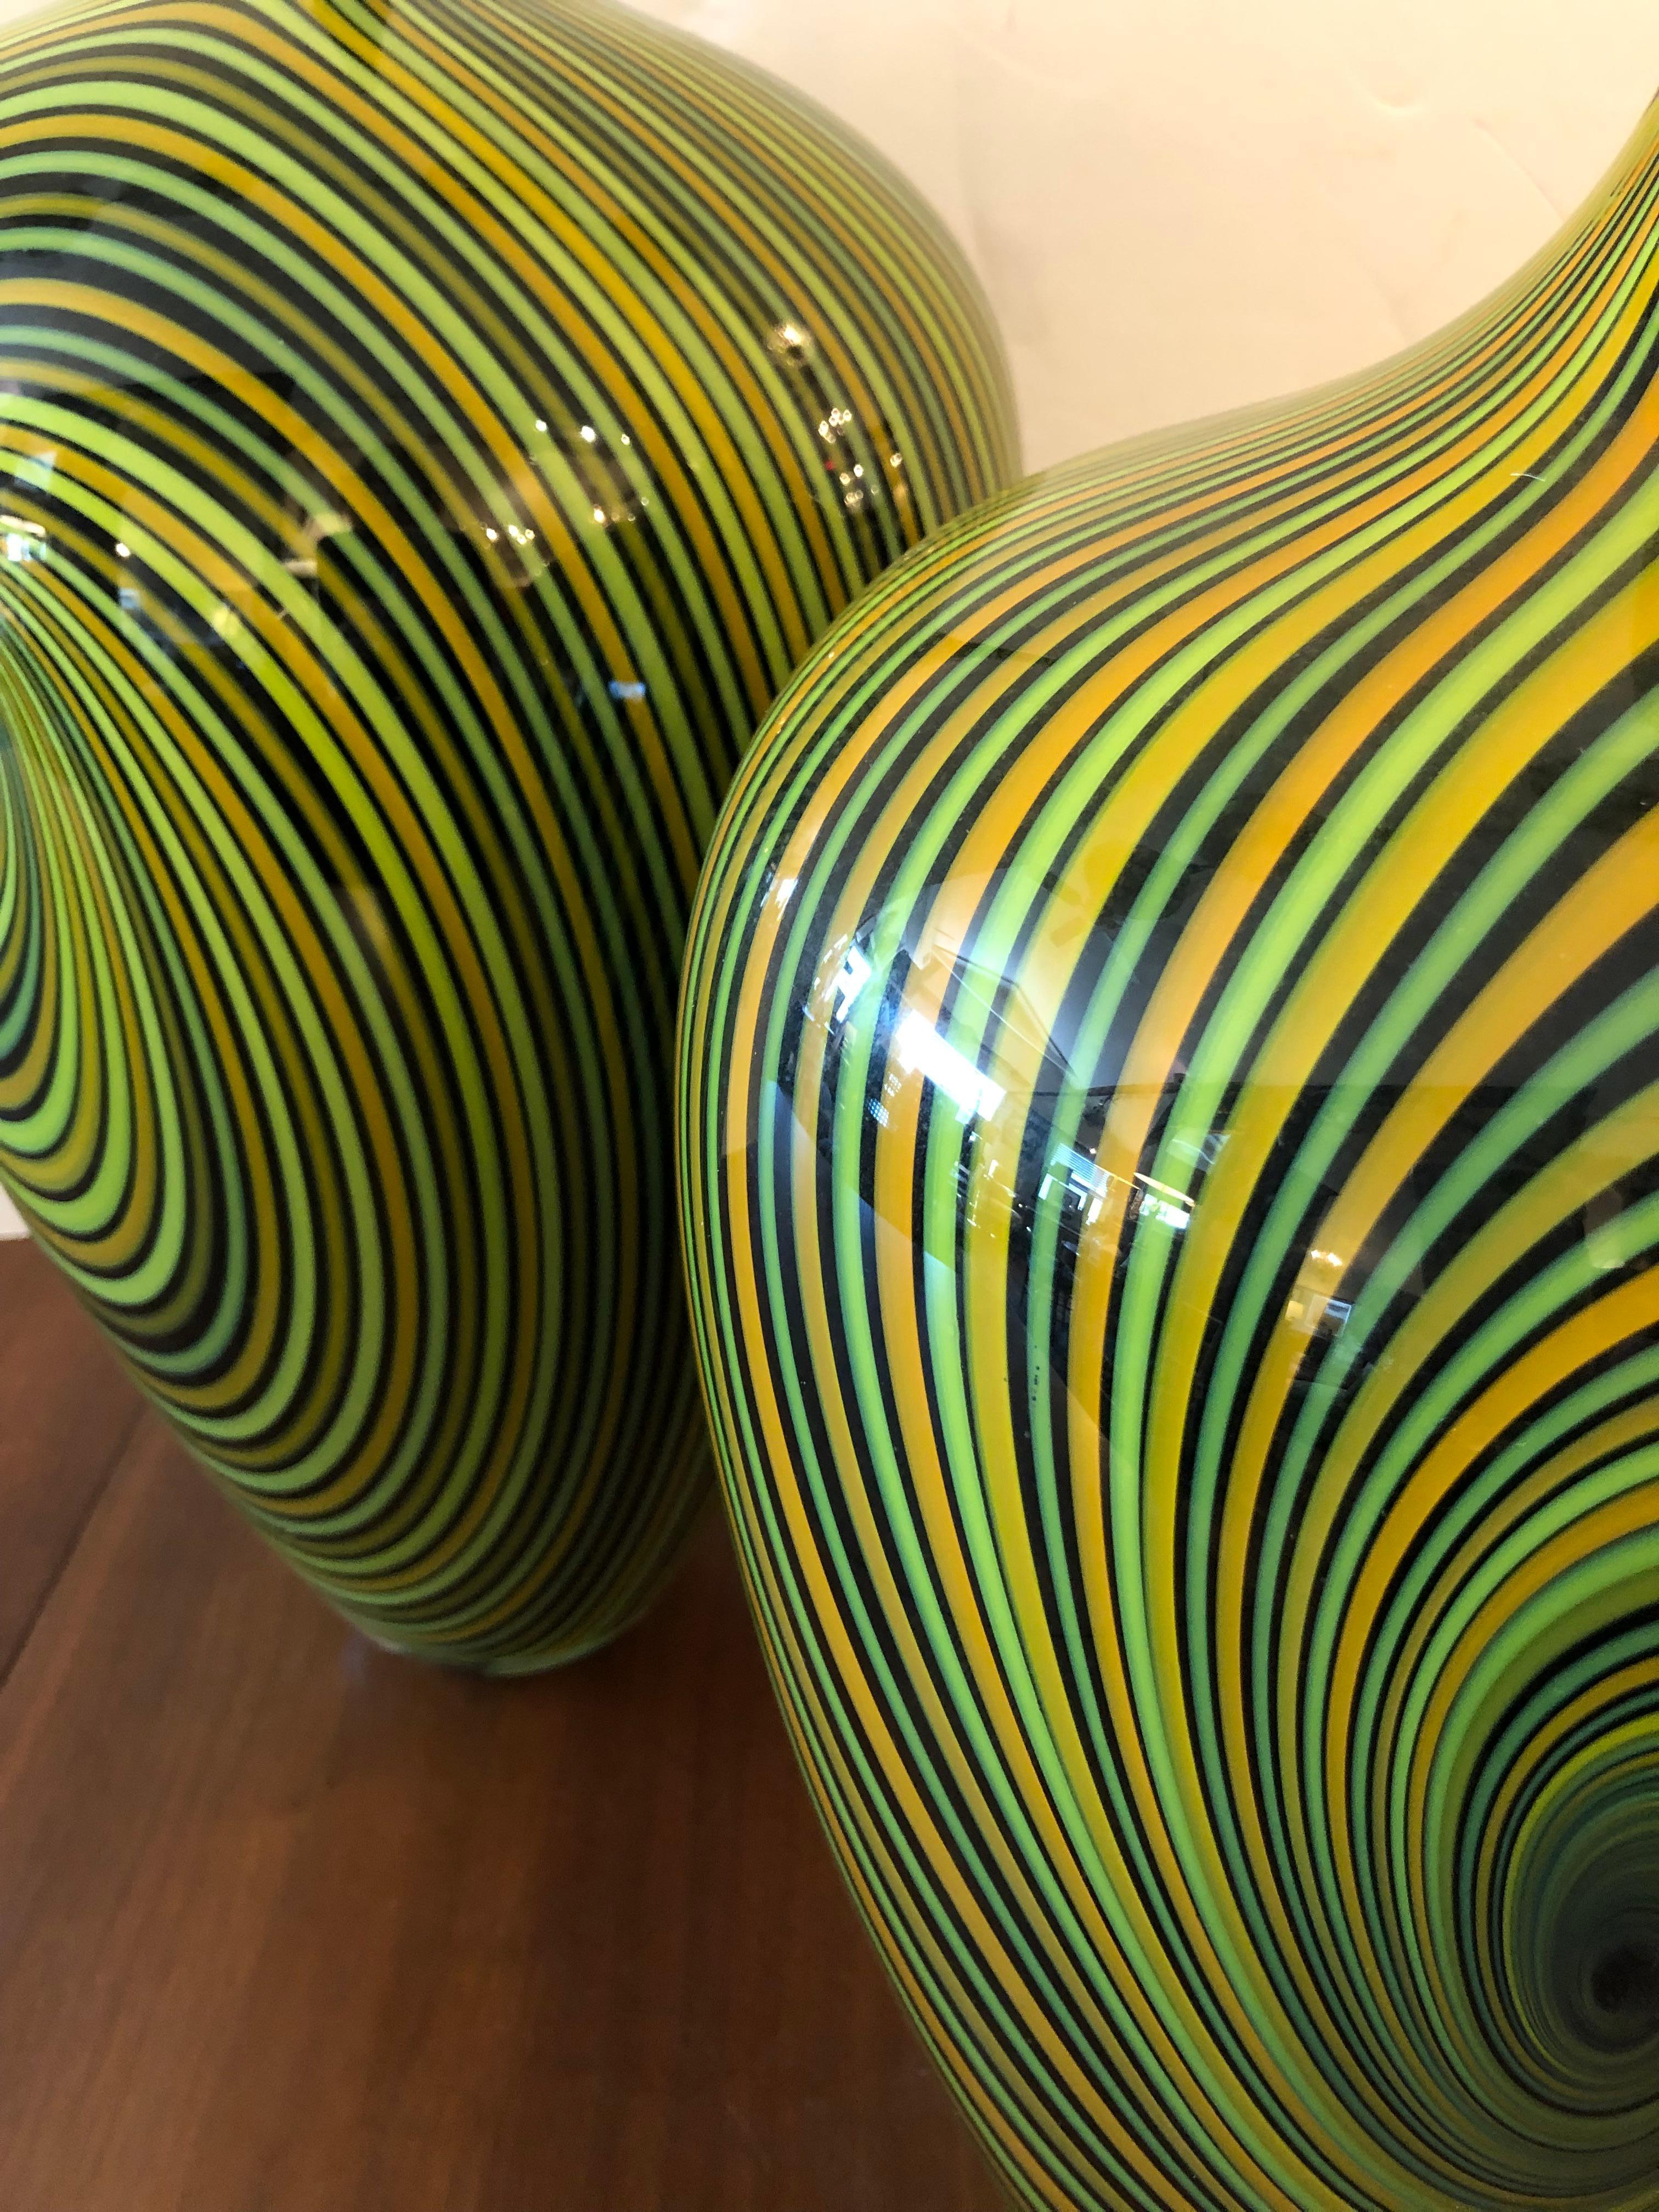 Extraordinary Pair of Blown Glass Vortex Vessels by Jeff Holmwood In Excellent Condition For Sale In Hopewell, NJ